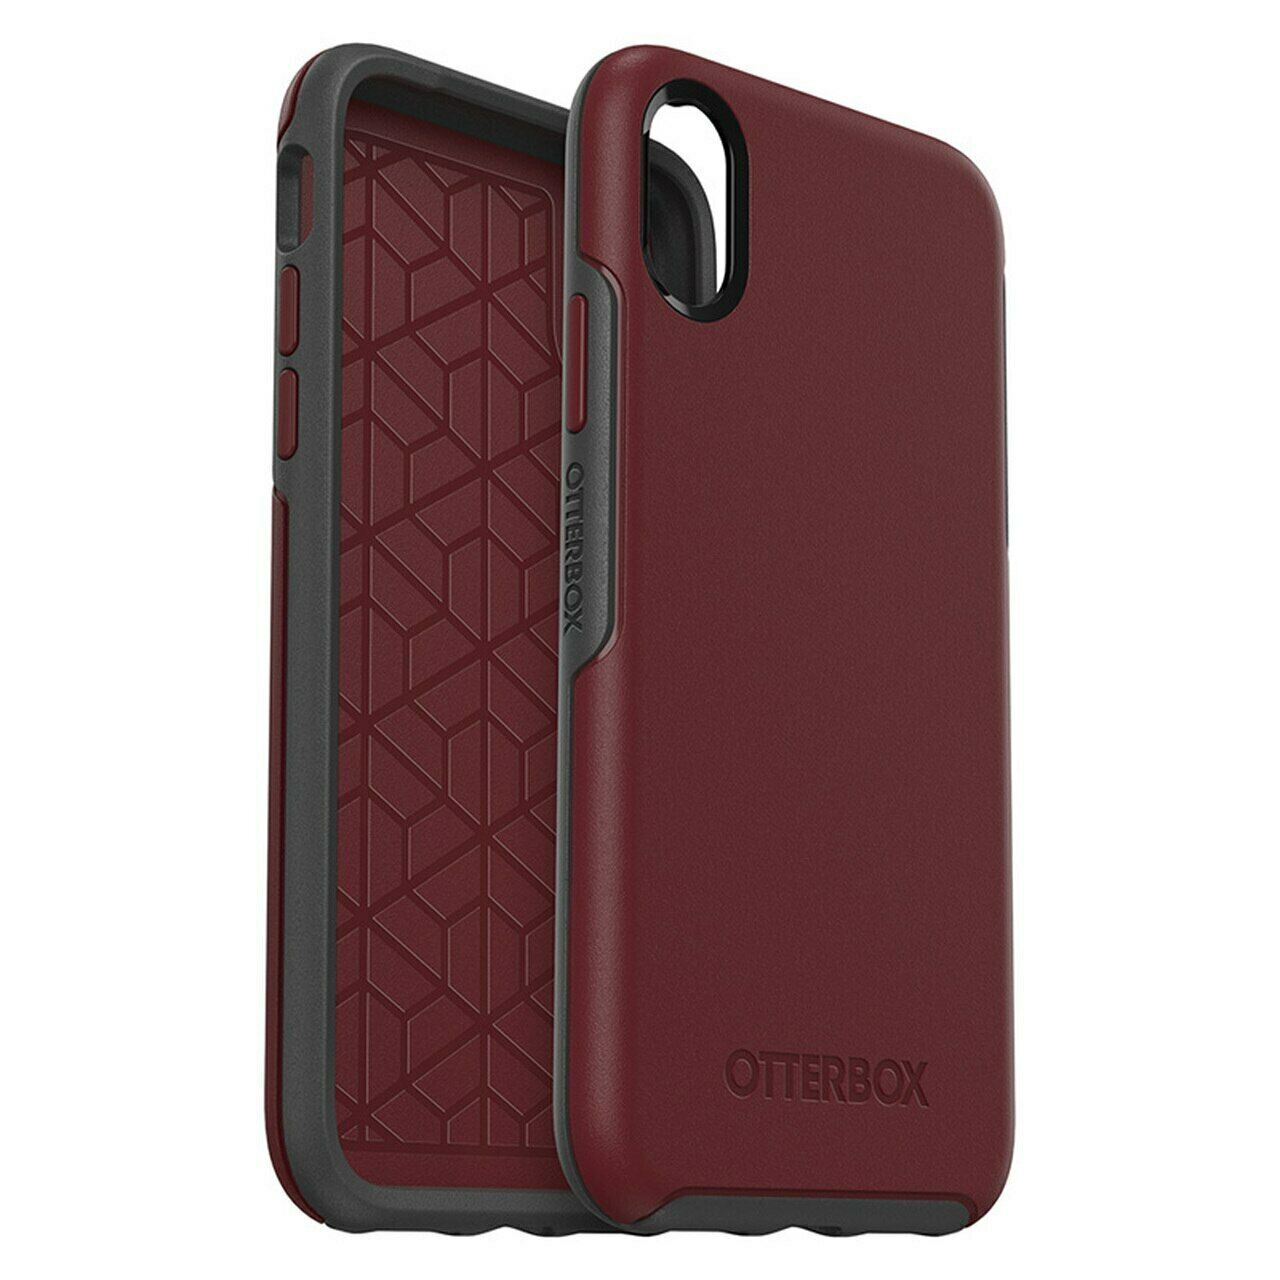 Otterbox Symmetry Case for iPhone X/XS - Fine Port/Maroon